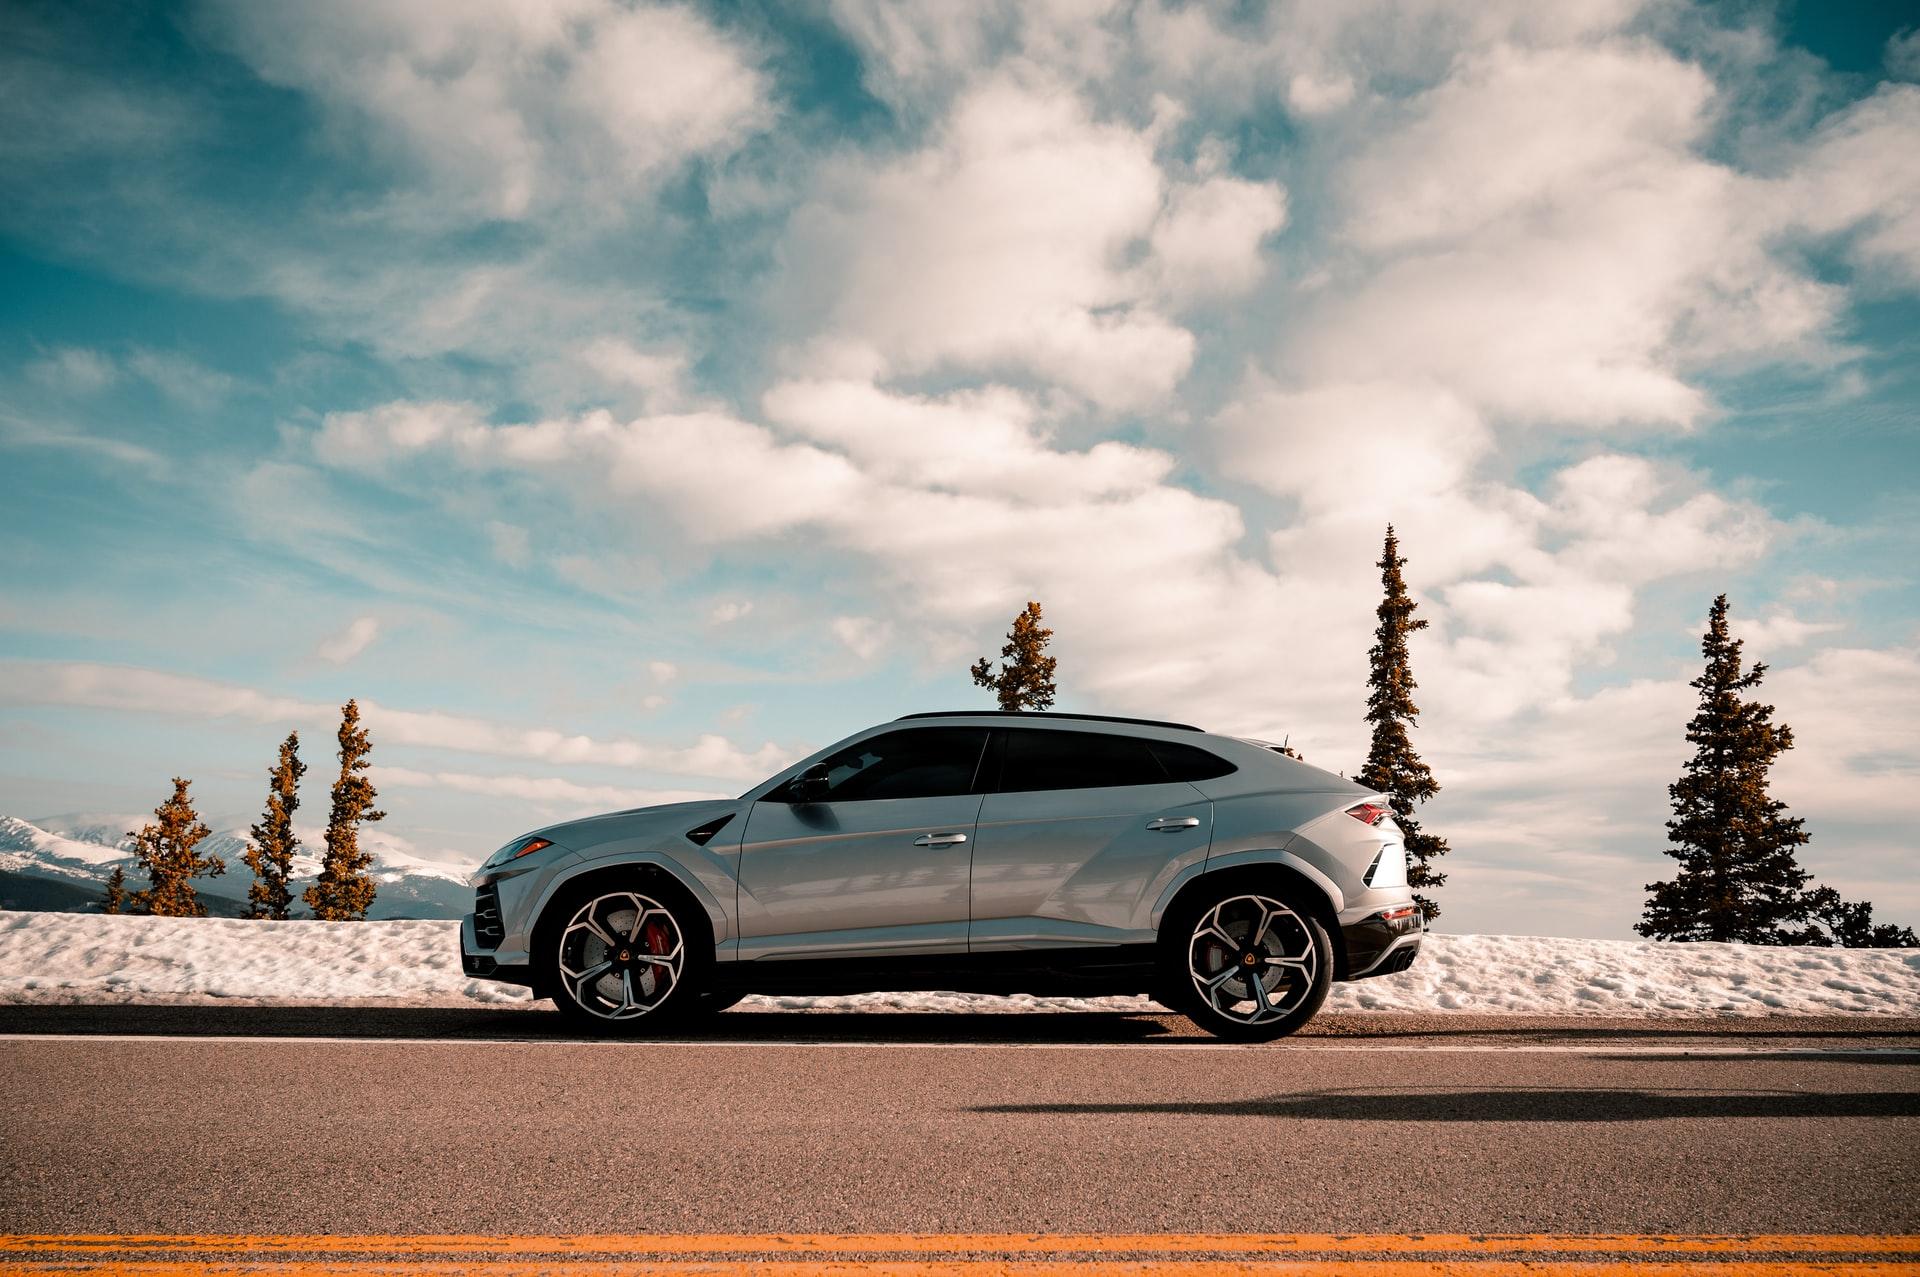 The Lamborghini Urus was taken to the highest, drivable point on earth. 